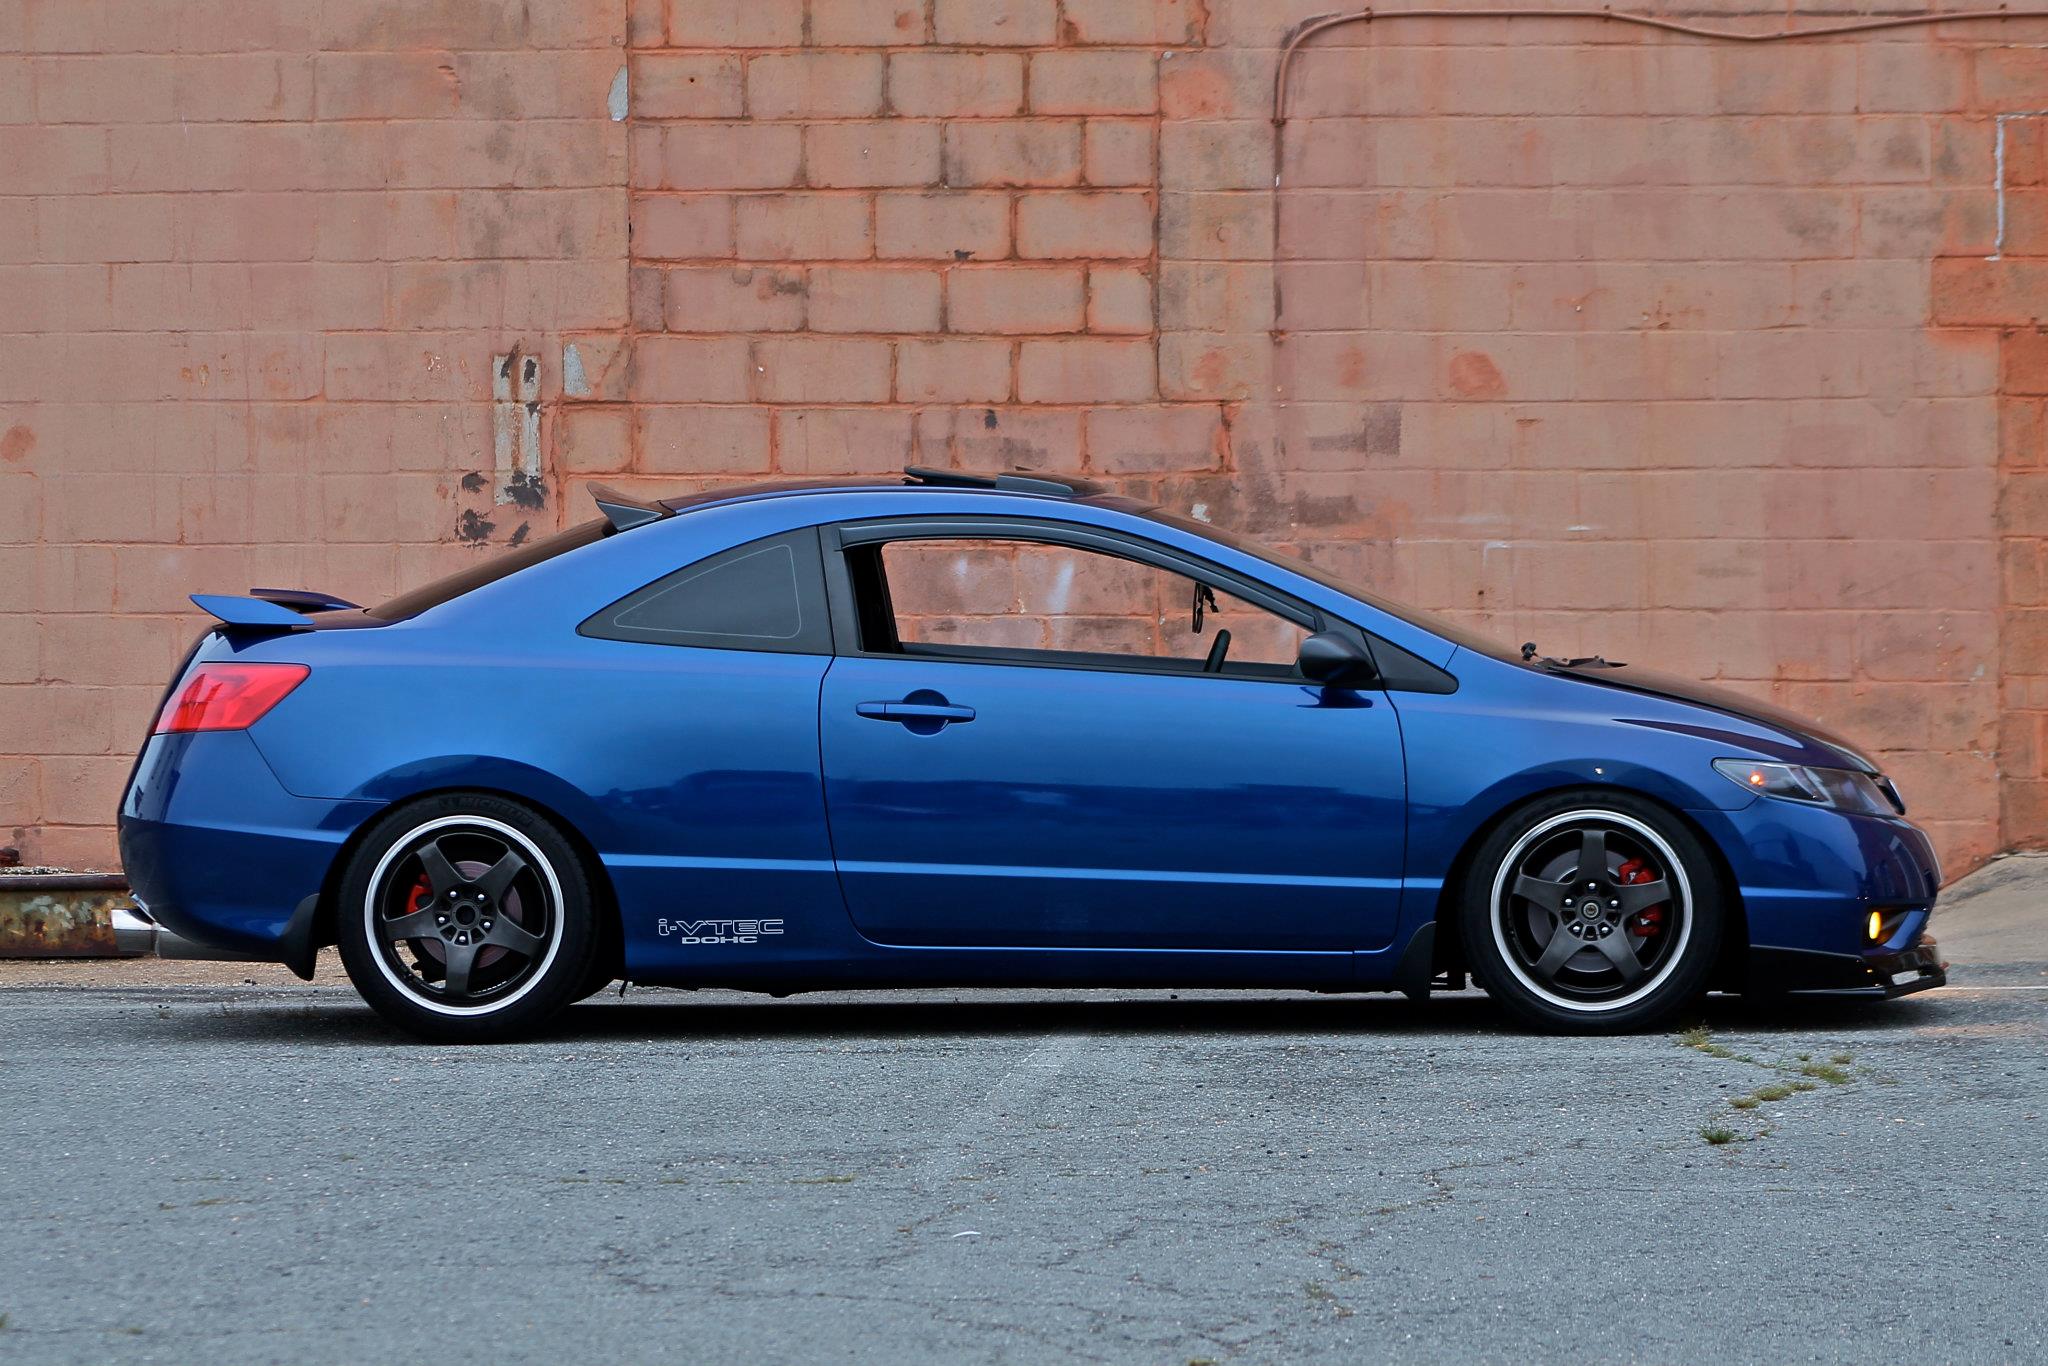 how to do cosmetic modifications (2009 honda civic 2dr coupe) - Honda Civic  Forum